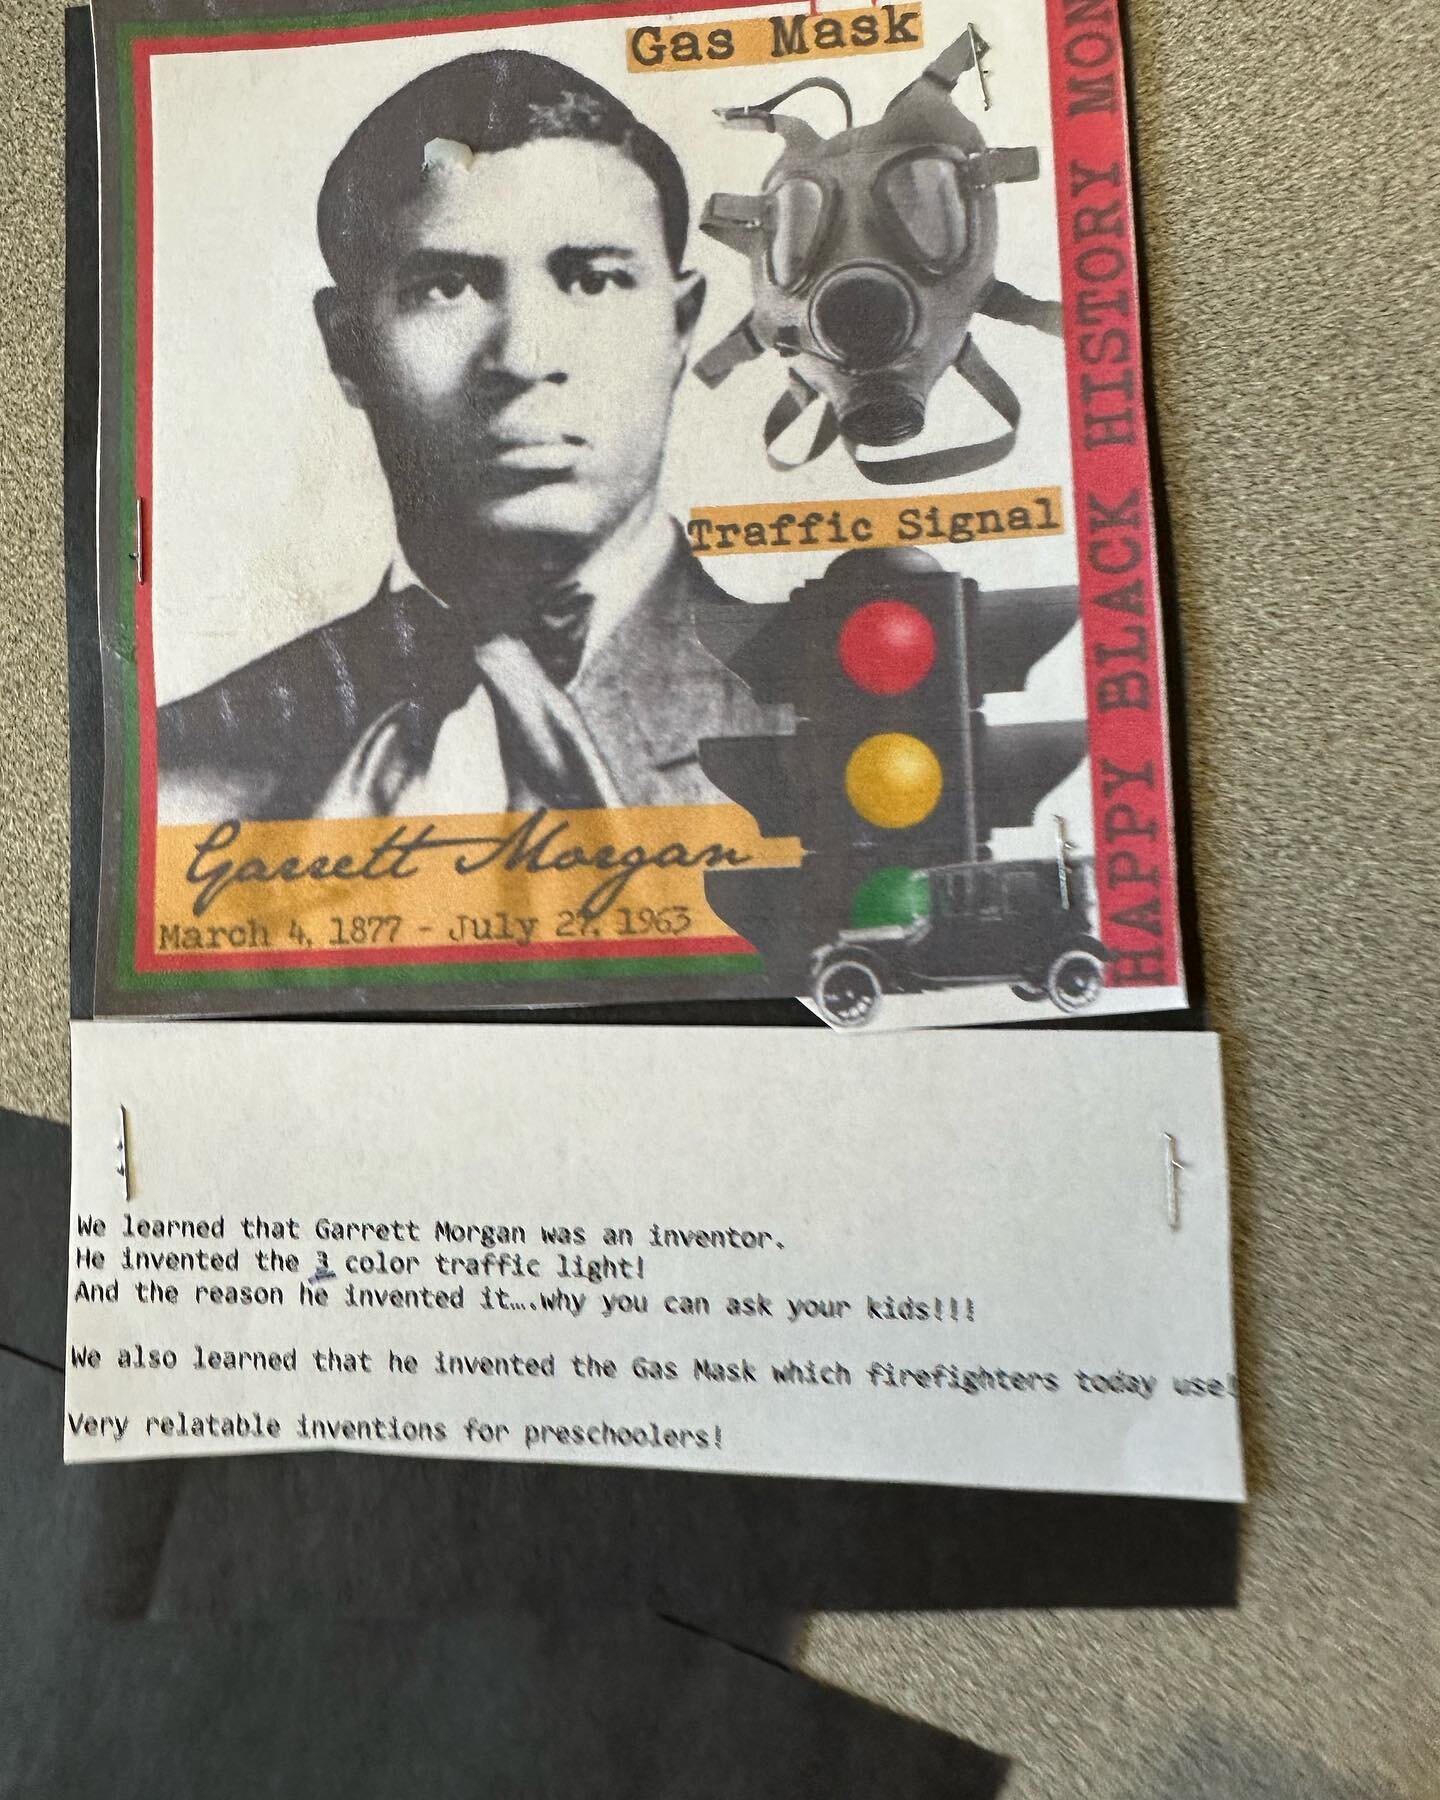 During Black History Month, we&rsquo;re making sure it&rsquo;s filled with stories that inspire, uplift, and celebrate. Stories like that of Garrett Morgan and his inventions of the tri-colored stoplight and the gas mask! 🎉📖 #PlayfulUnity #PlayfulE